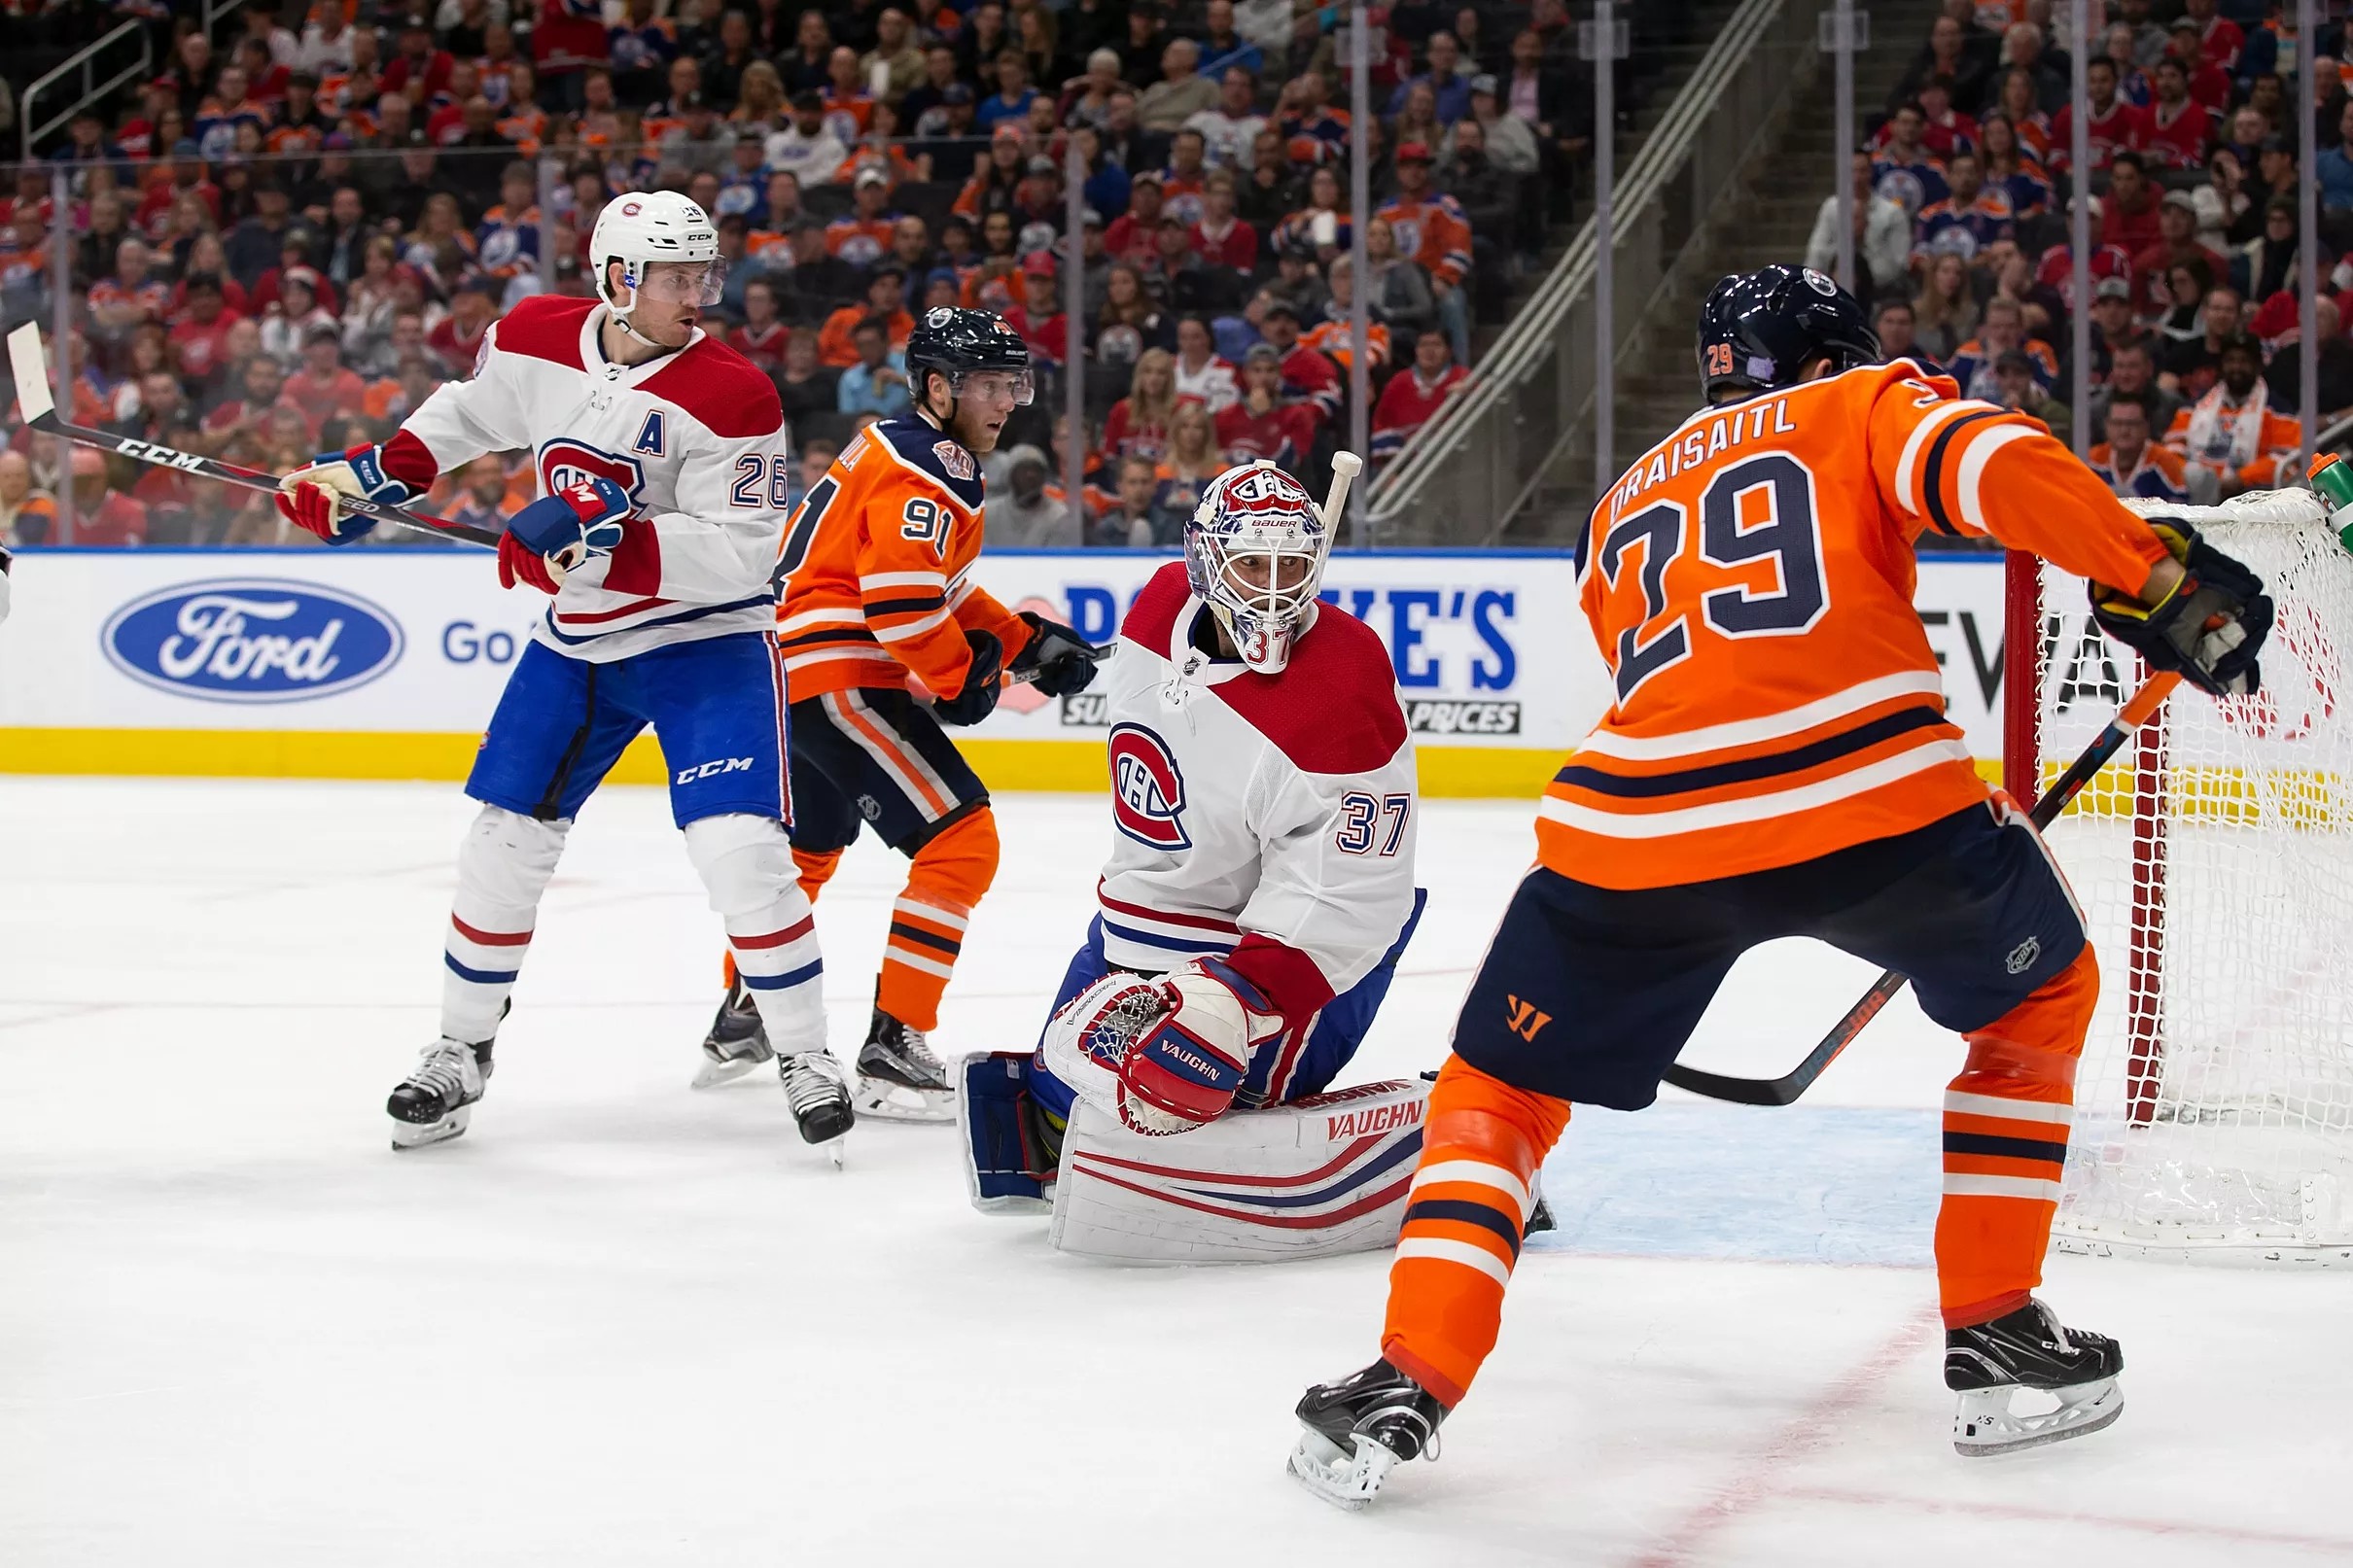 Canadiens Oilers game recap Montreal allows Edmonton to snap skid in